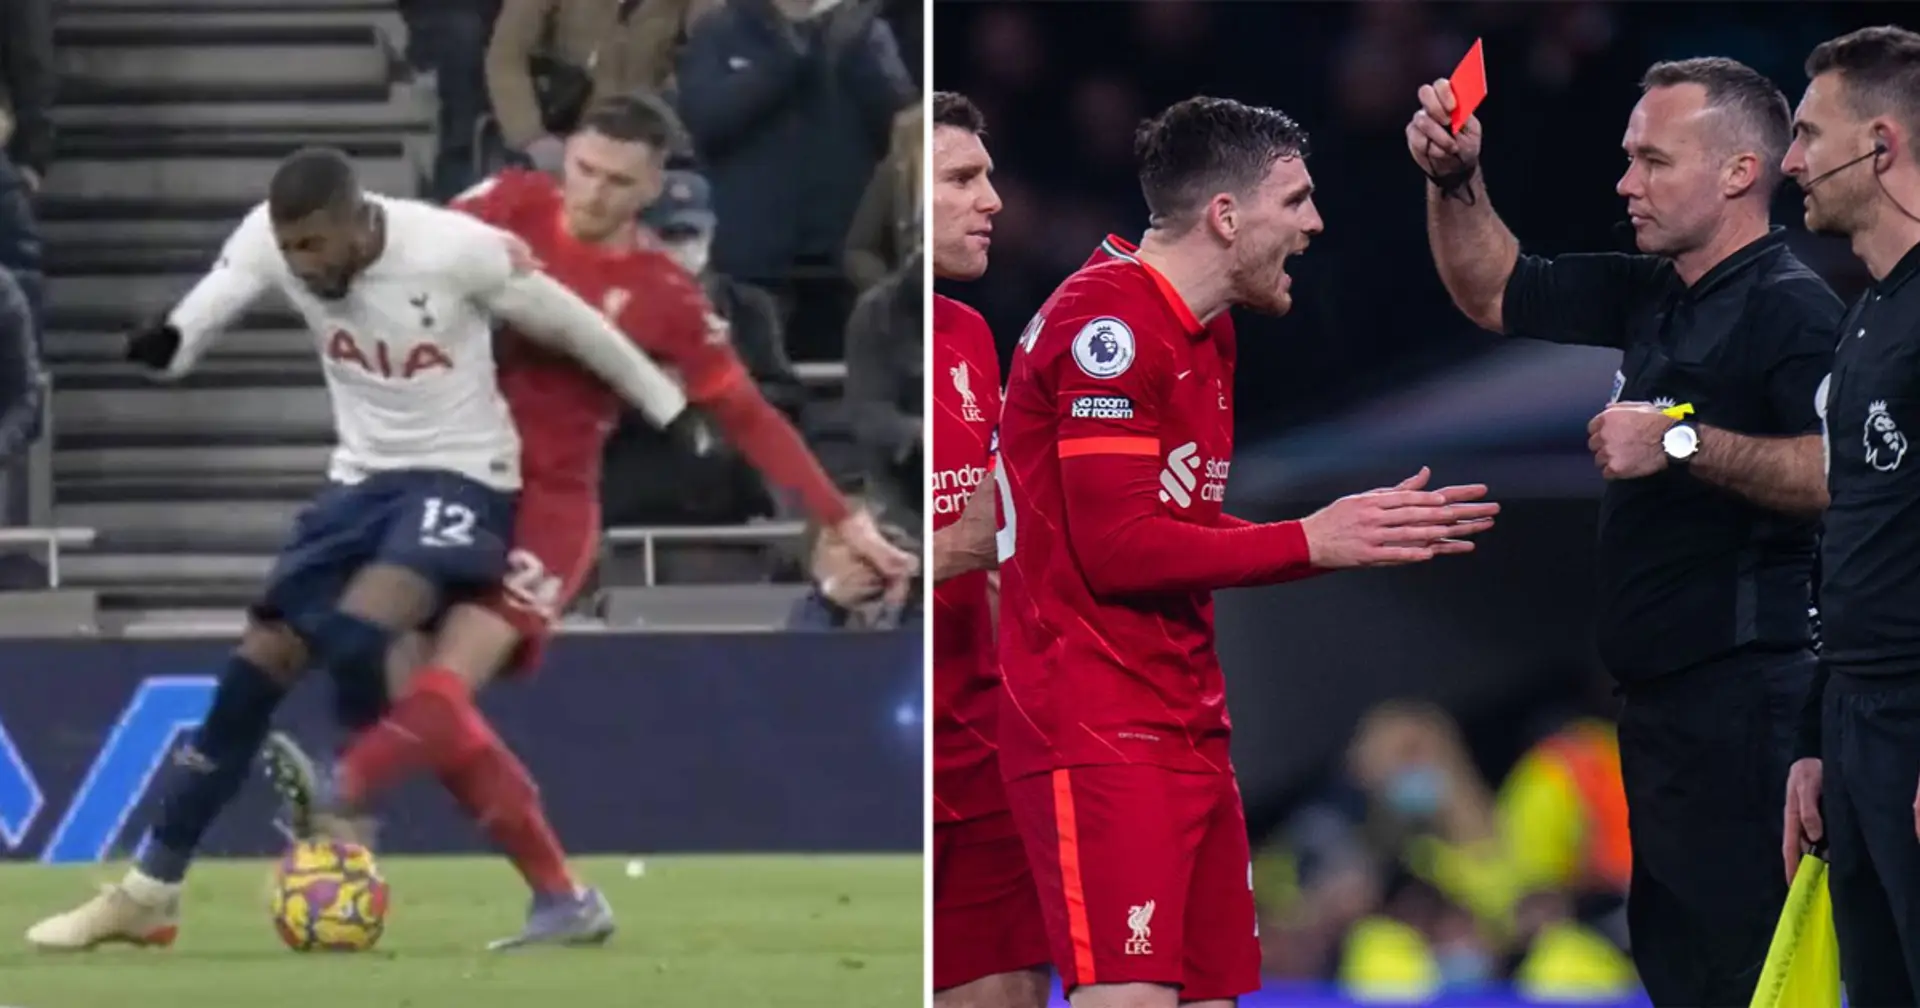 Andy Robertson to be suspended for Chelsea clash after Boxing Day postponement